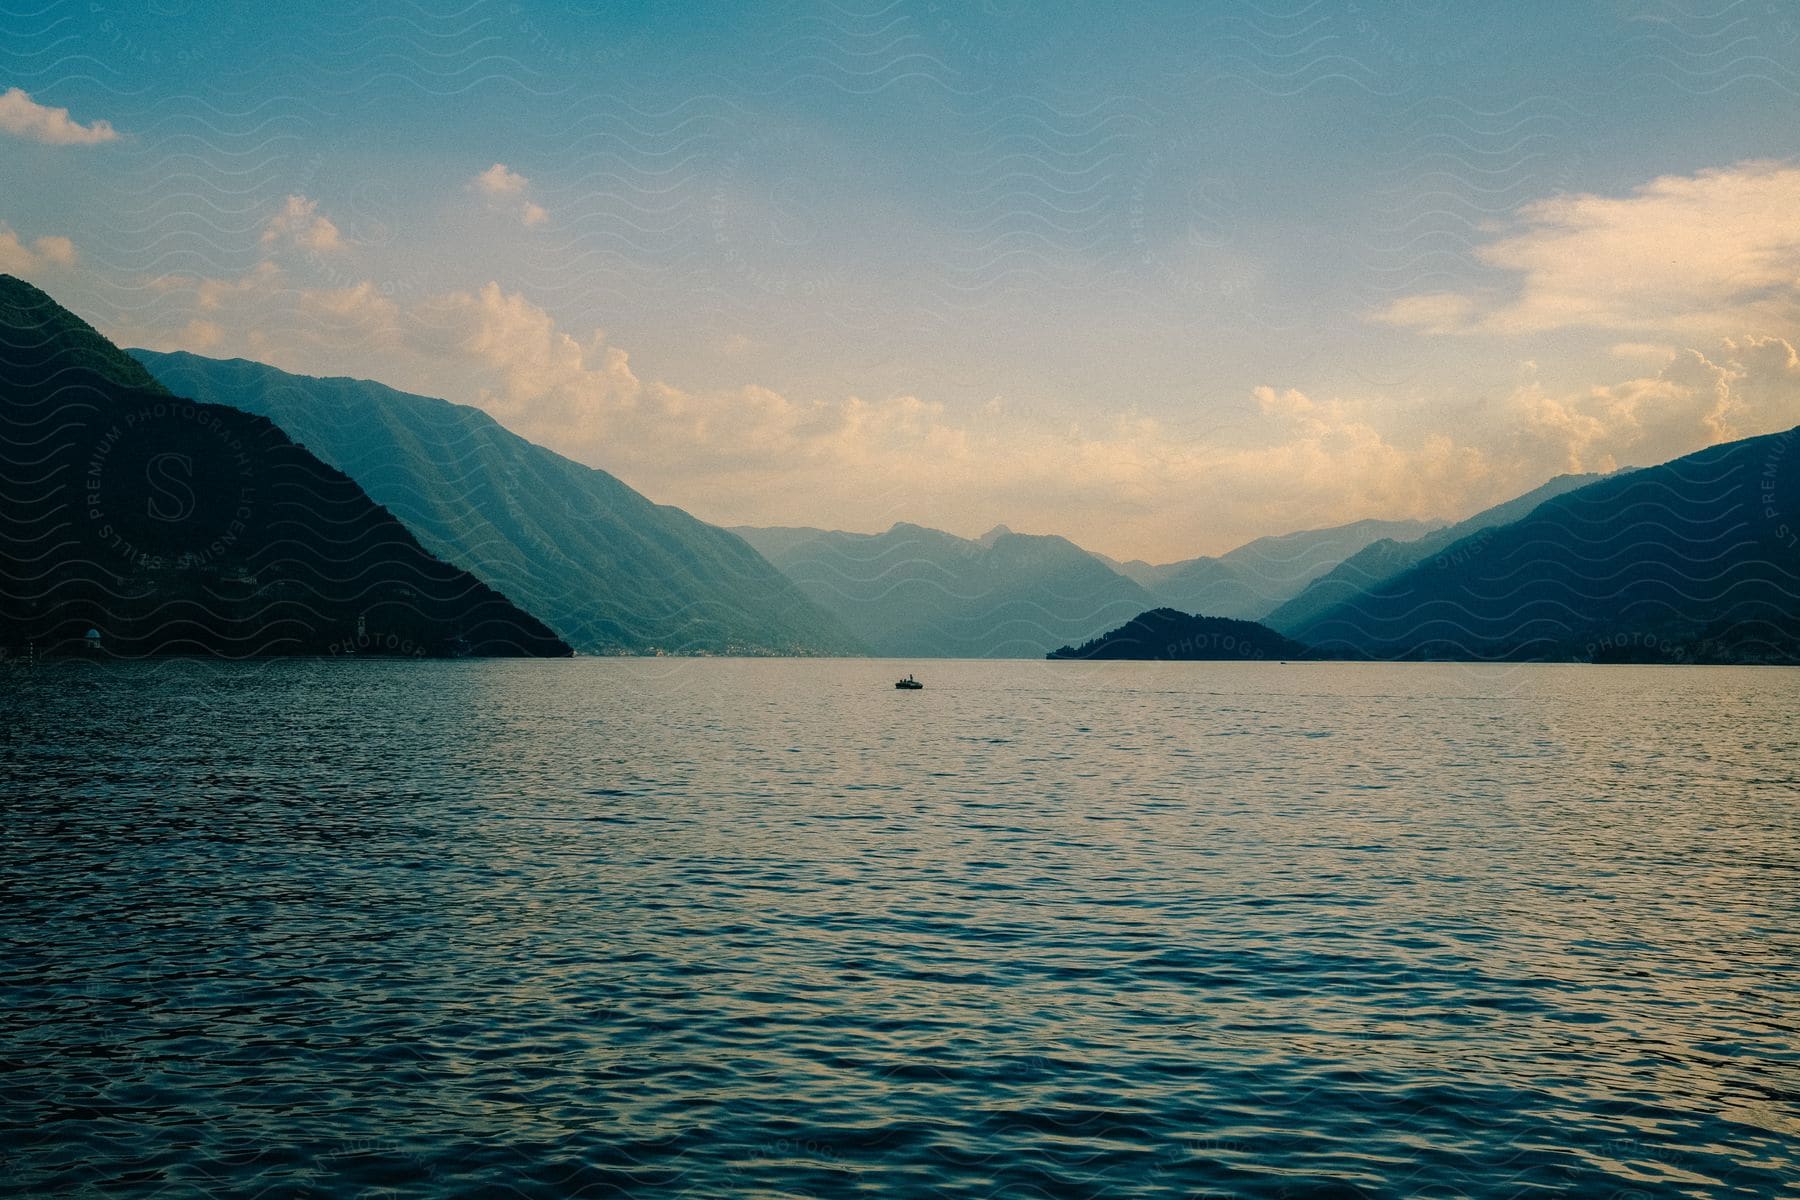 A small boat sails in a river between mountains under a cloudy sky